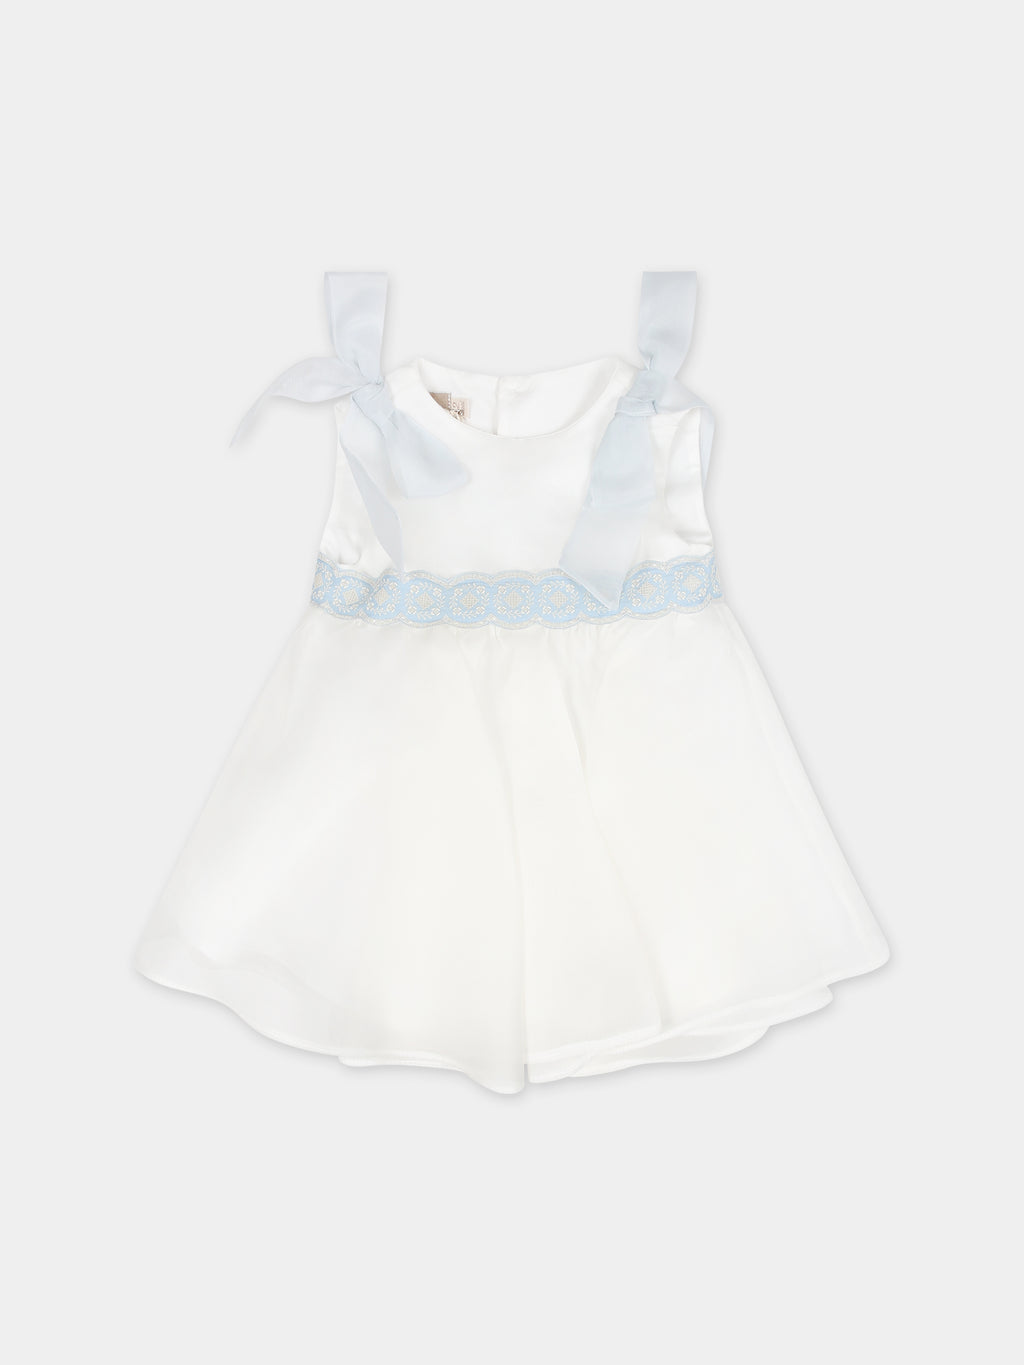 White dress for baby girl with light blue embroidery